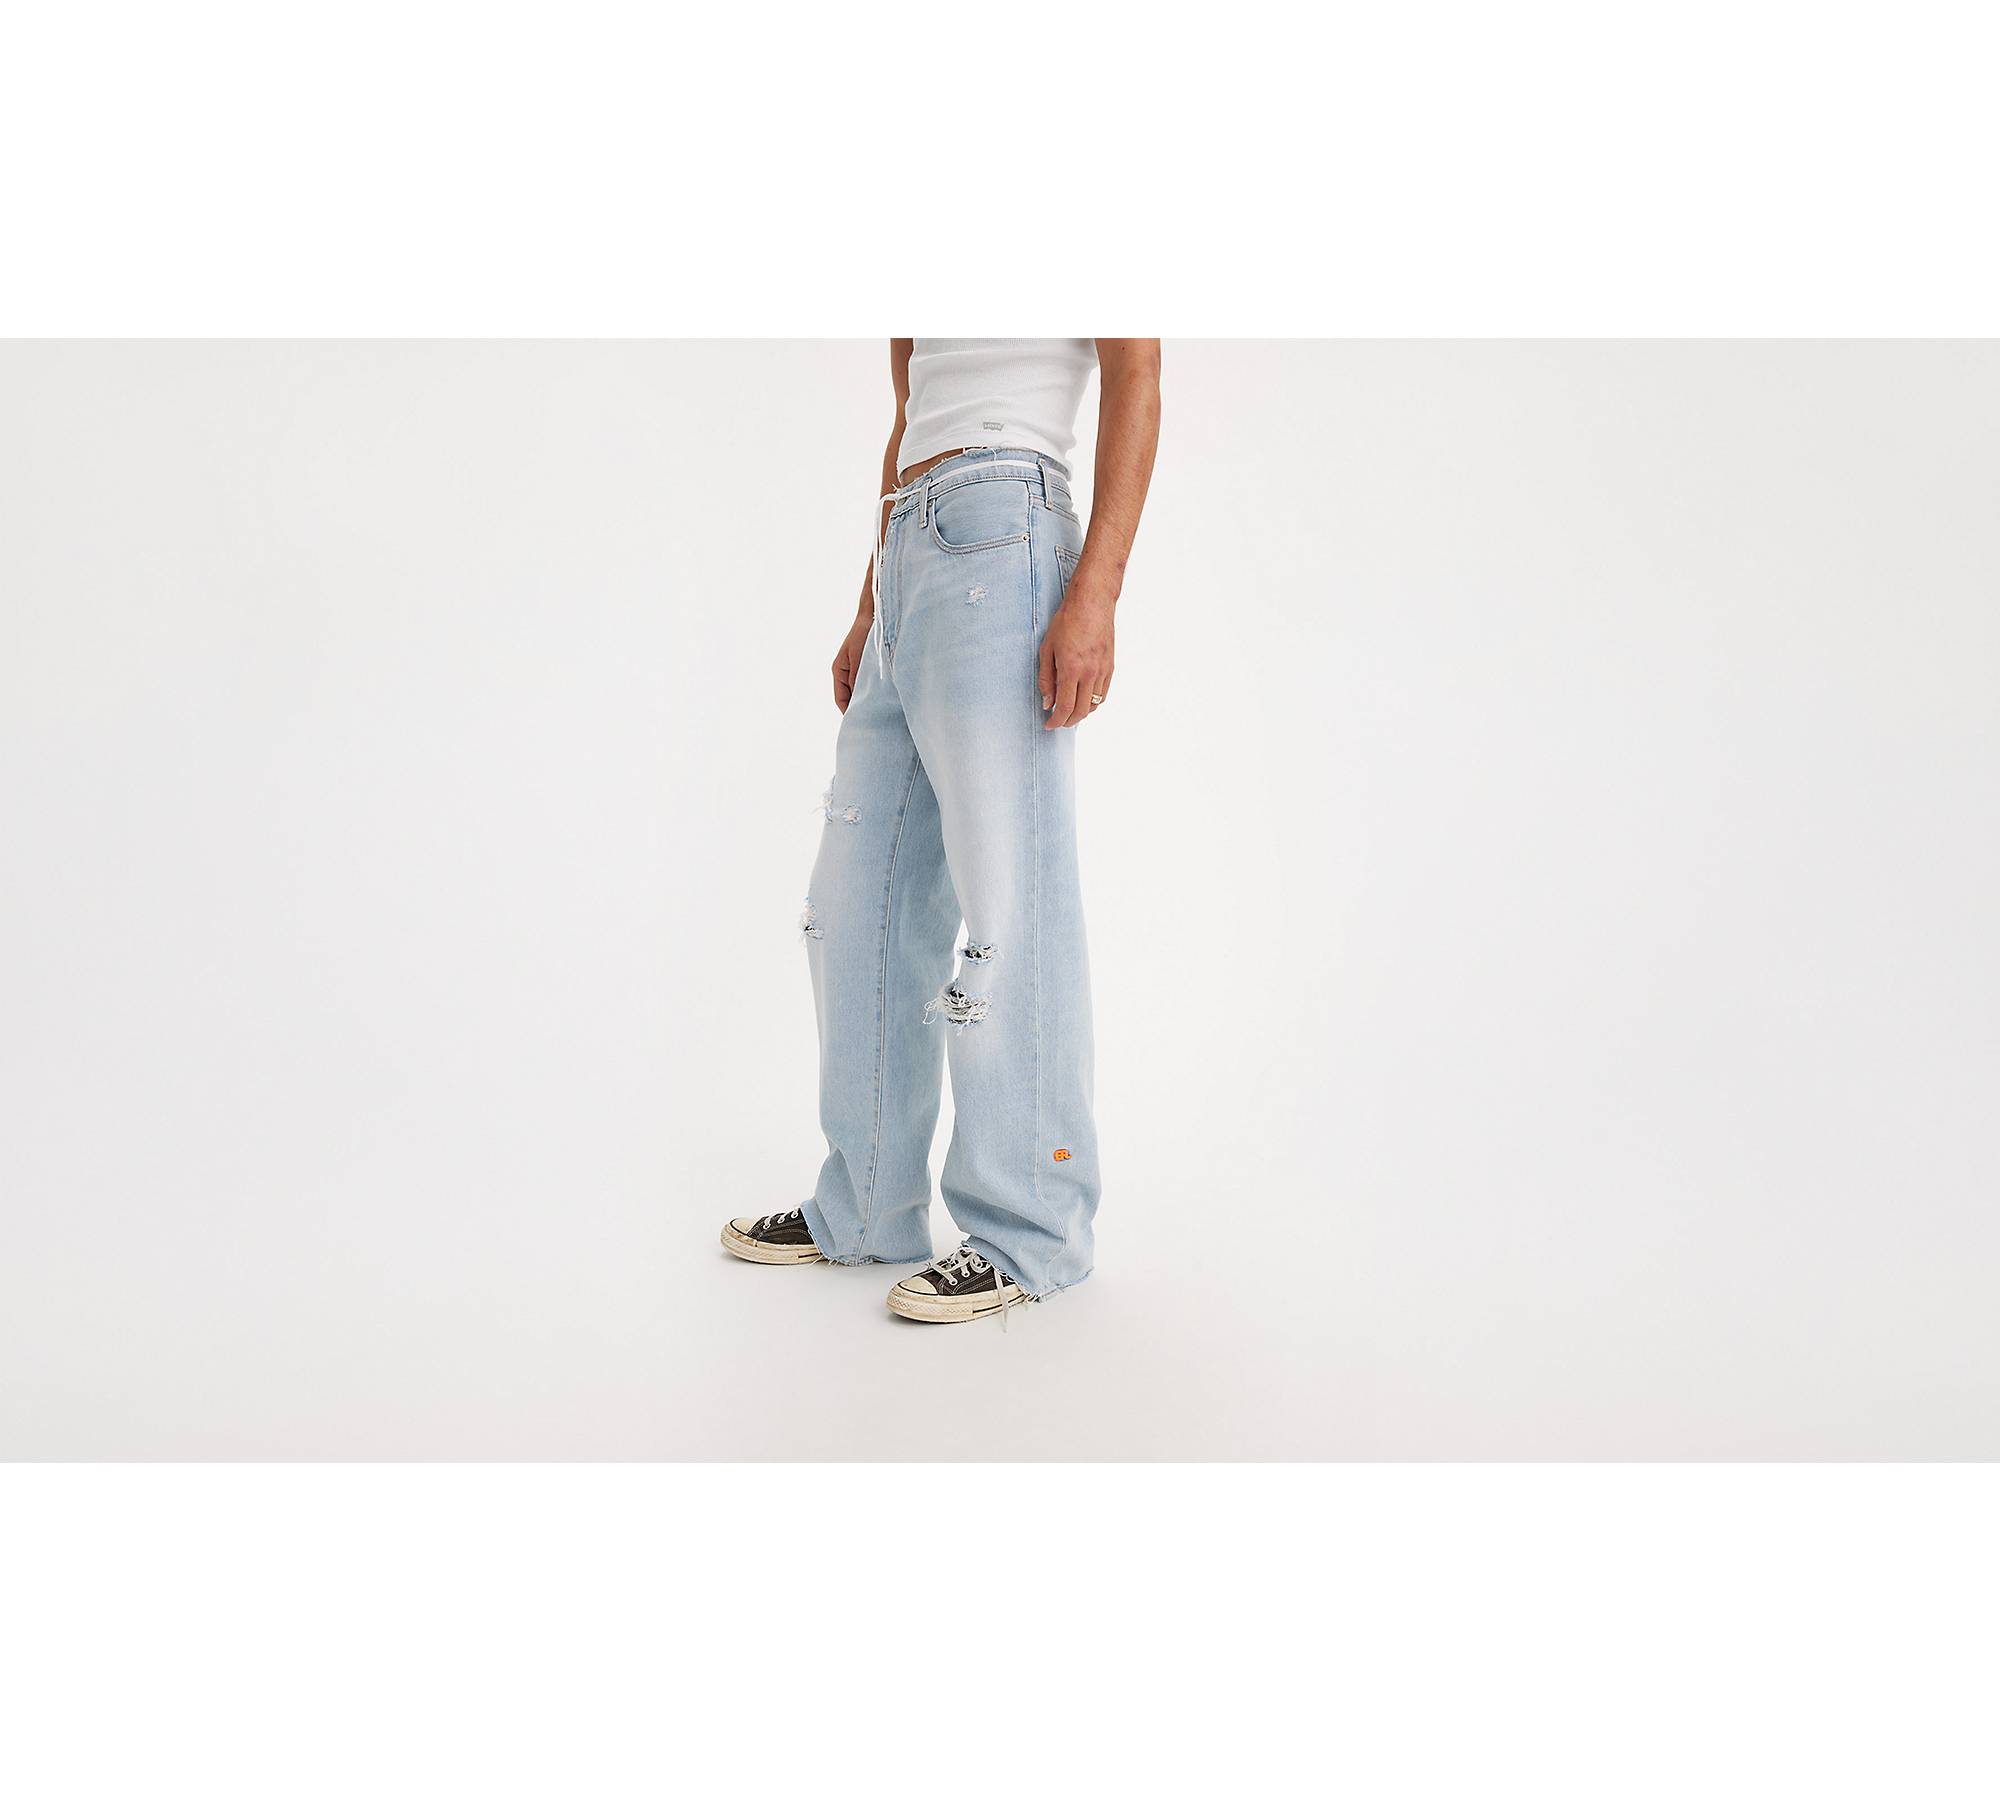 Levi's® X Erl Men's Stay Loose Jeans - Light Wash